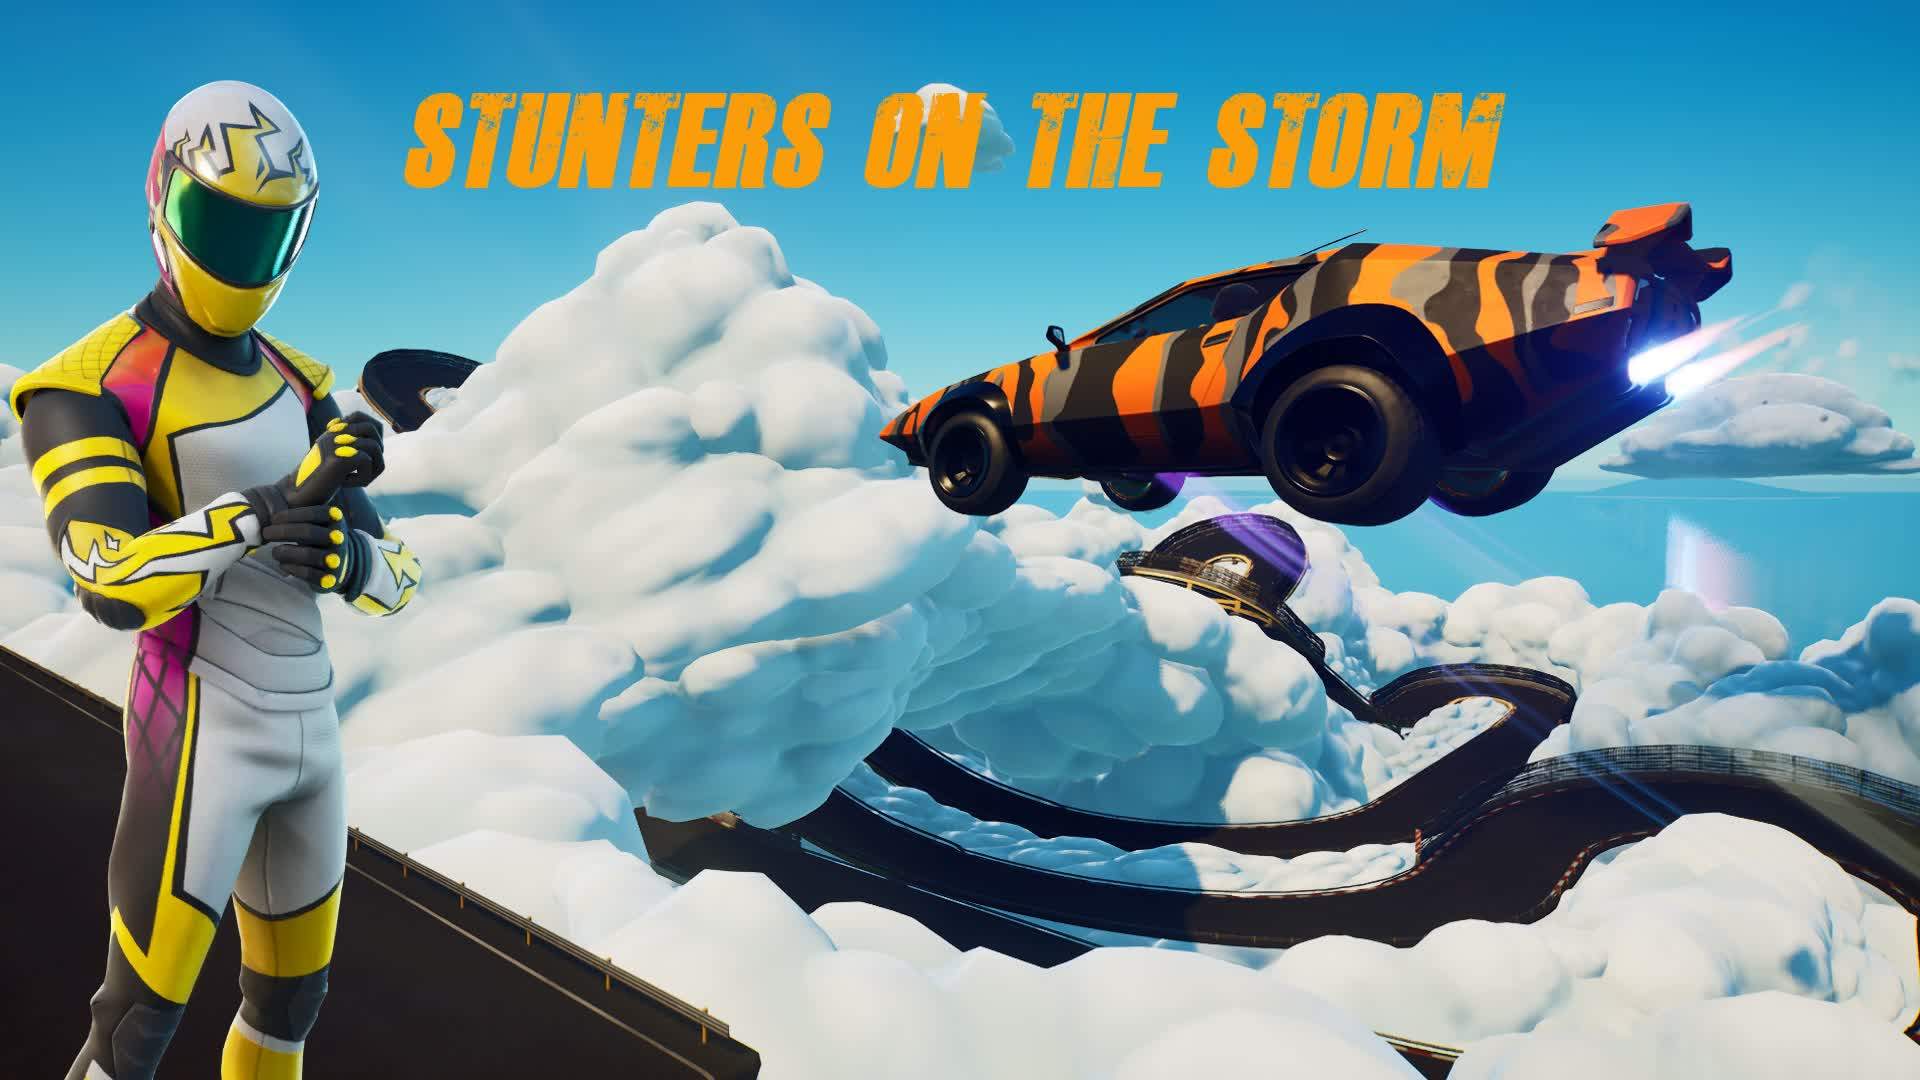 STUNTERS ON THE STORM